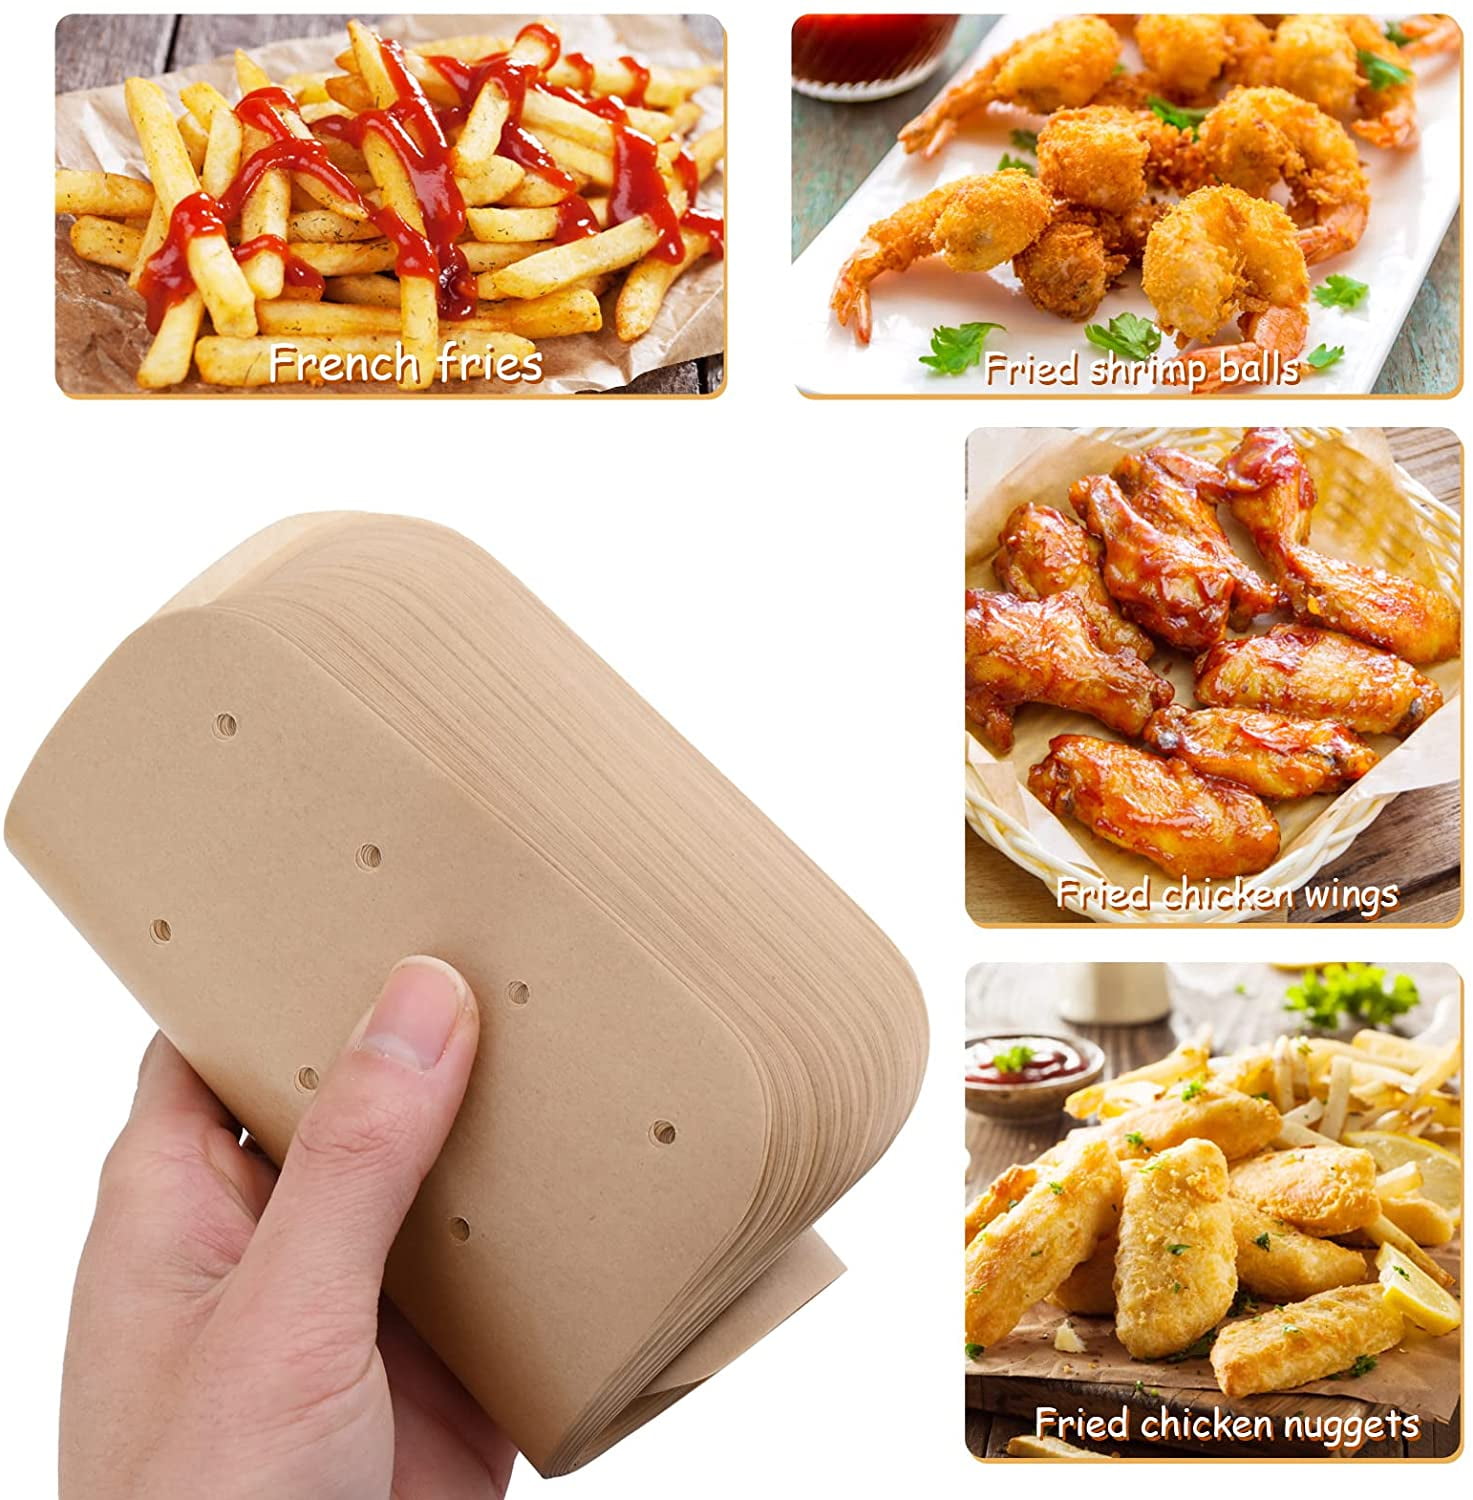 Airfryer Liners for Ninja Air Fryer 6.5 Inch,2-5 Qt Air Fryer Paper Liners  Disposable,100 Pcs Baking Parchment Sheets Air Fryer Accessories for Ninja